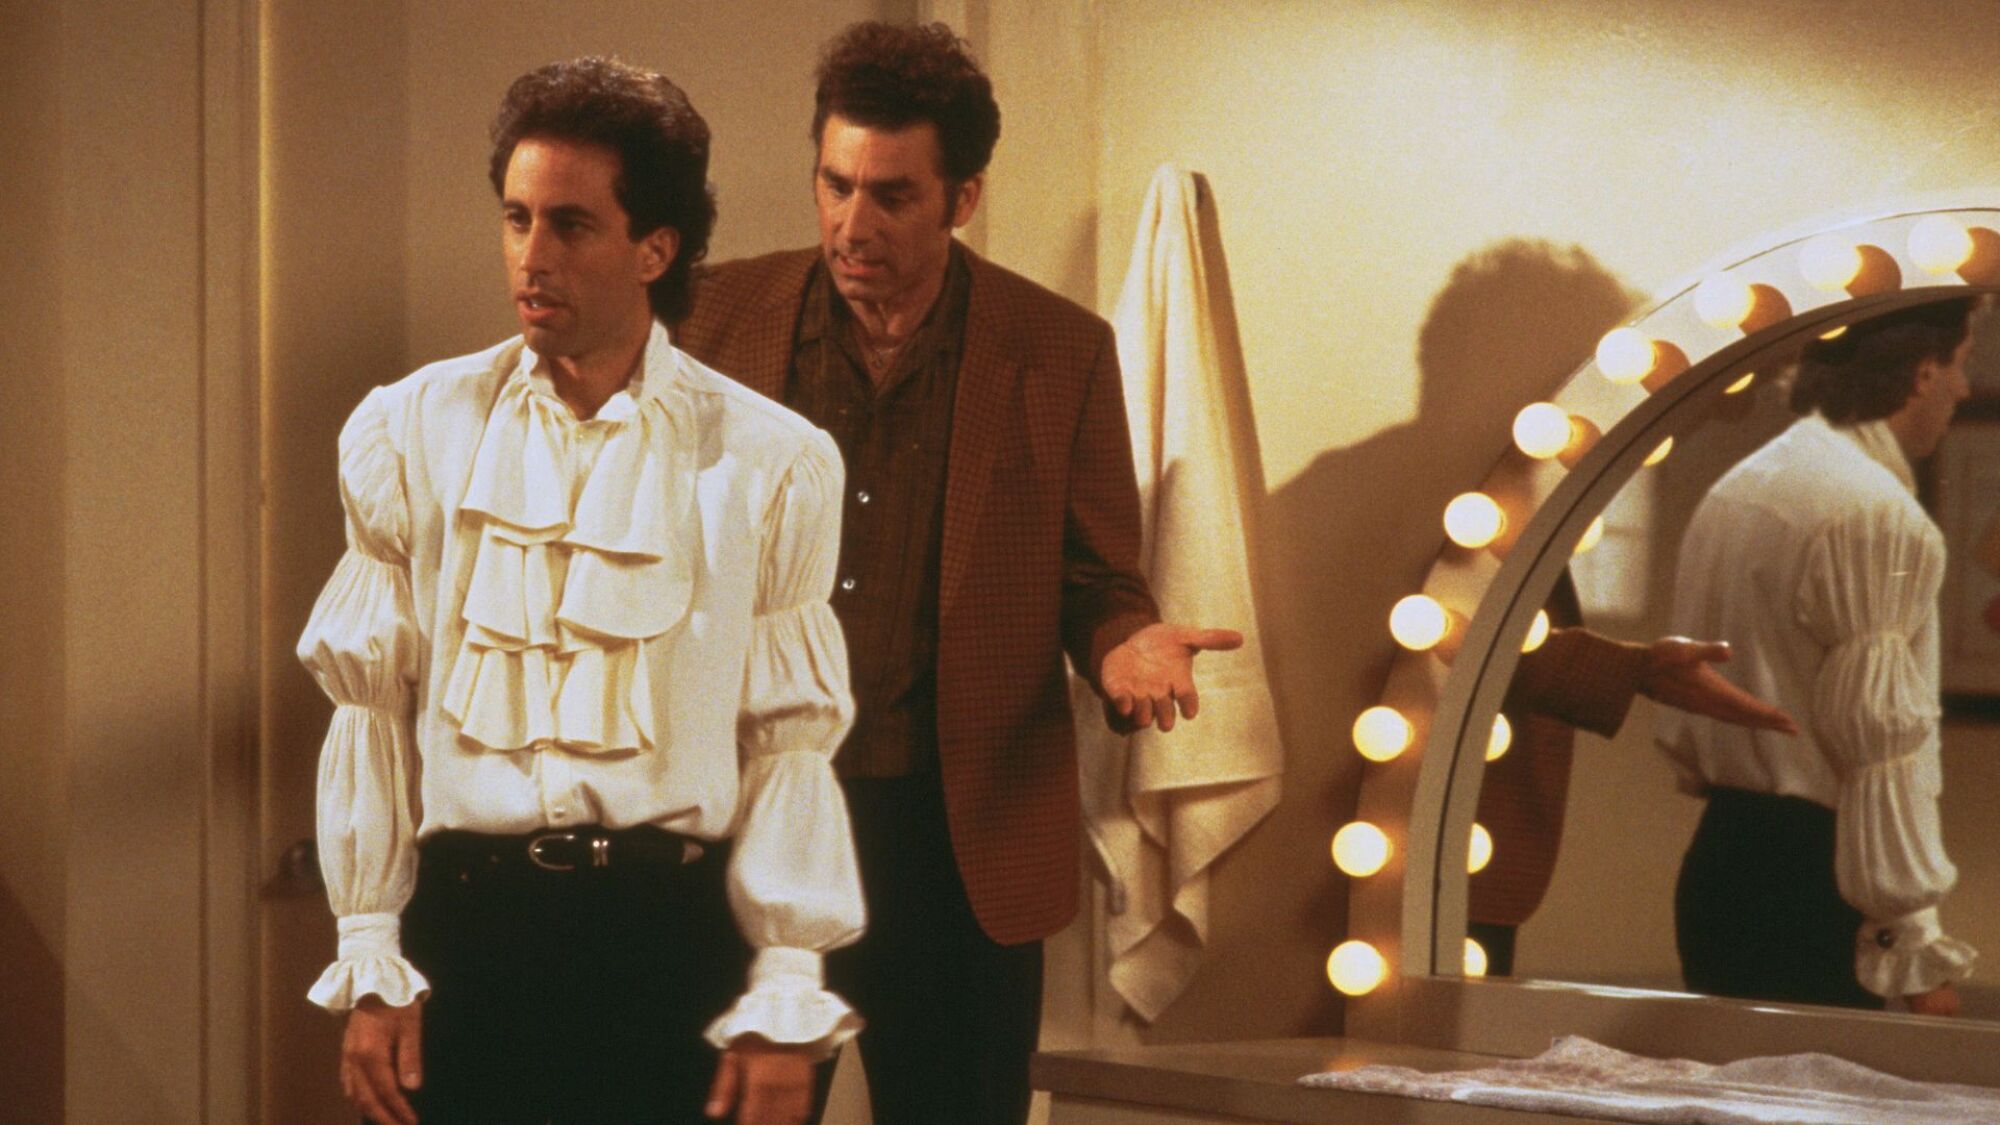 Jerry in the pirate shirt in "Seinfeld."